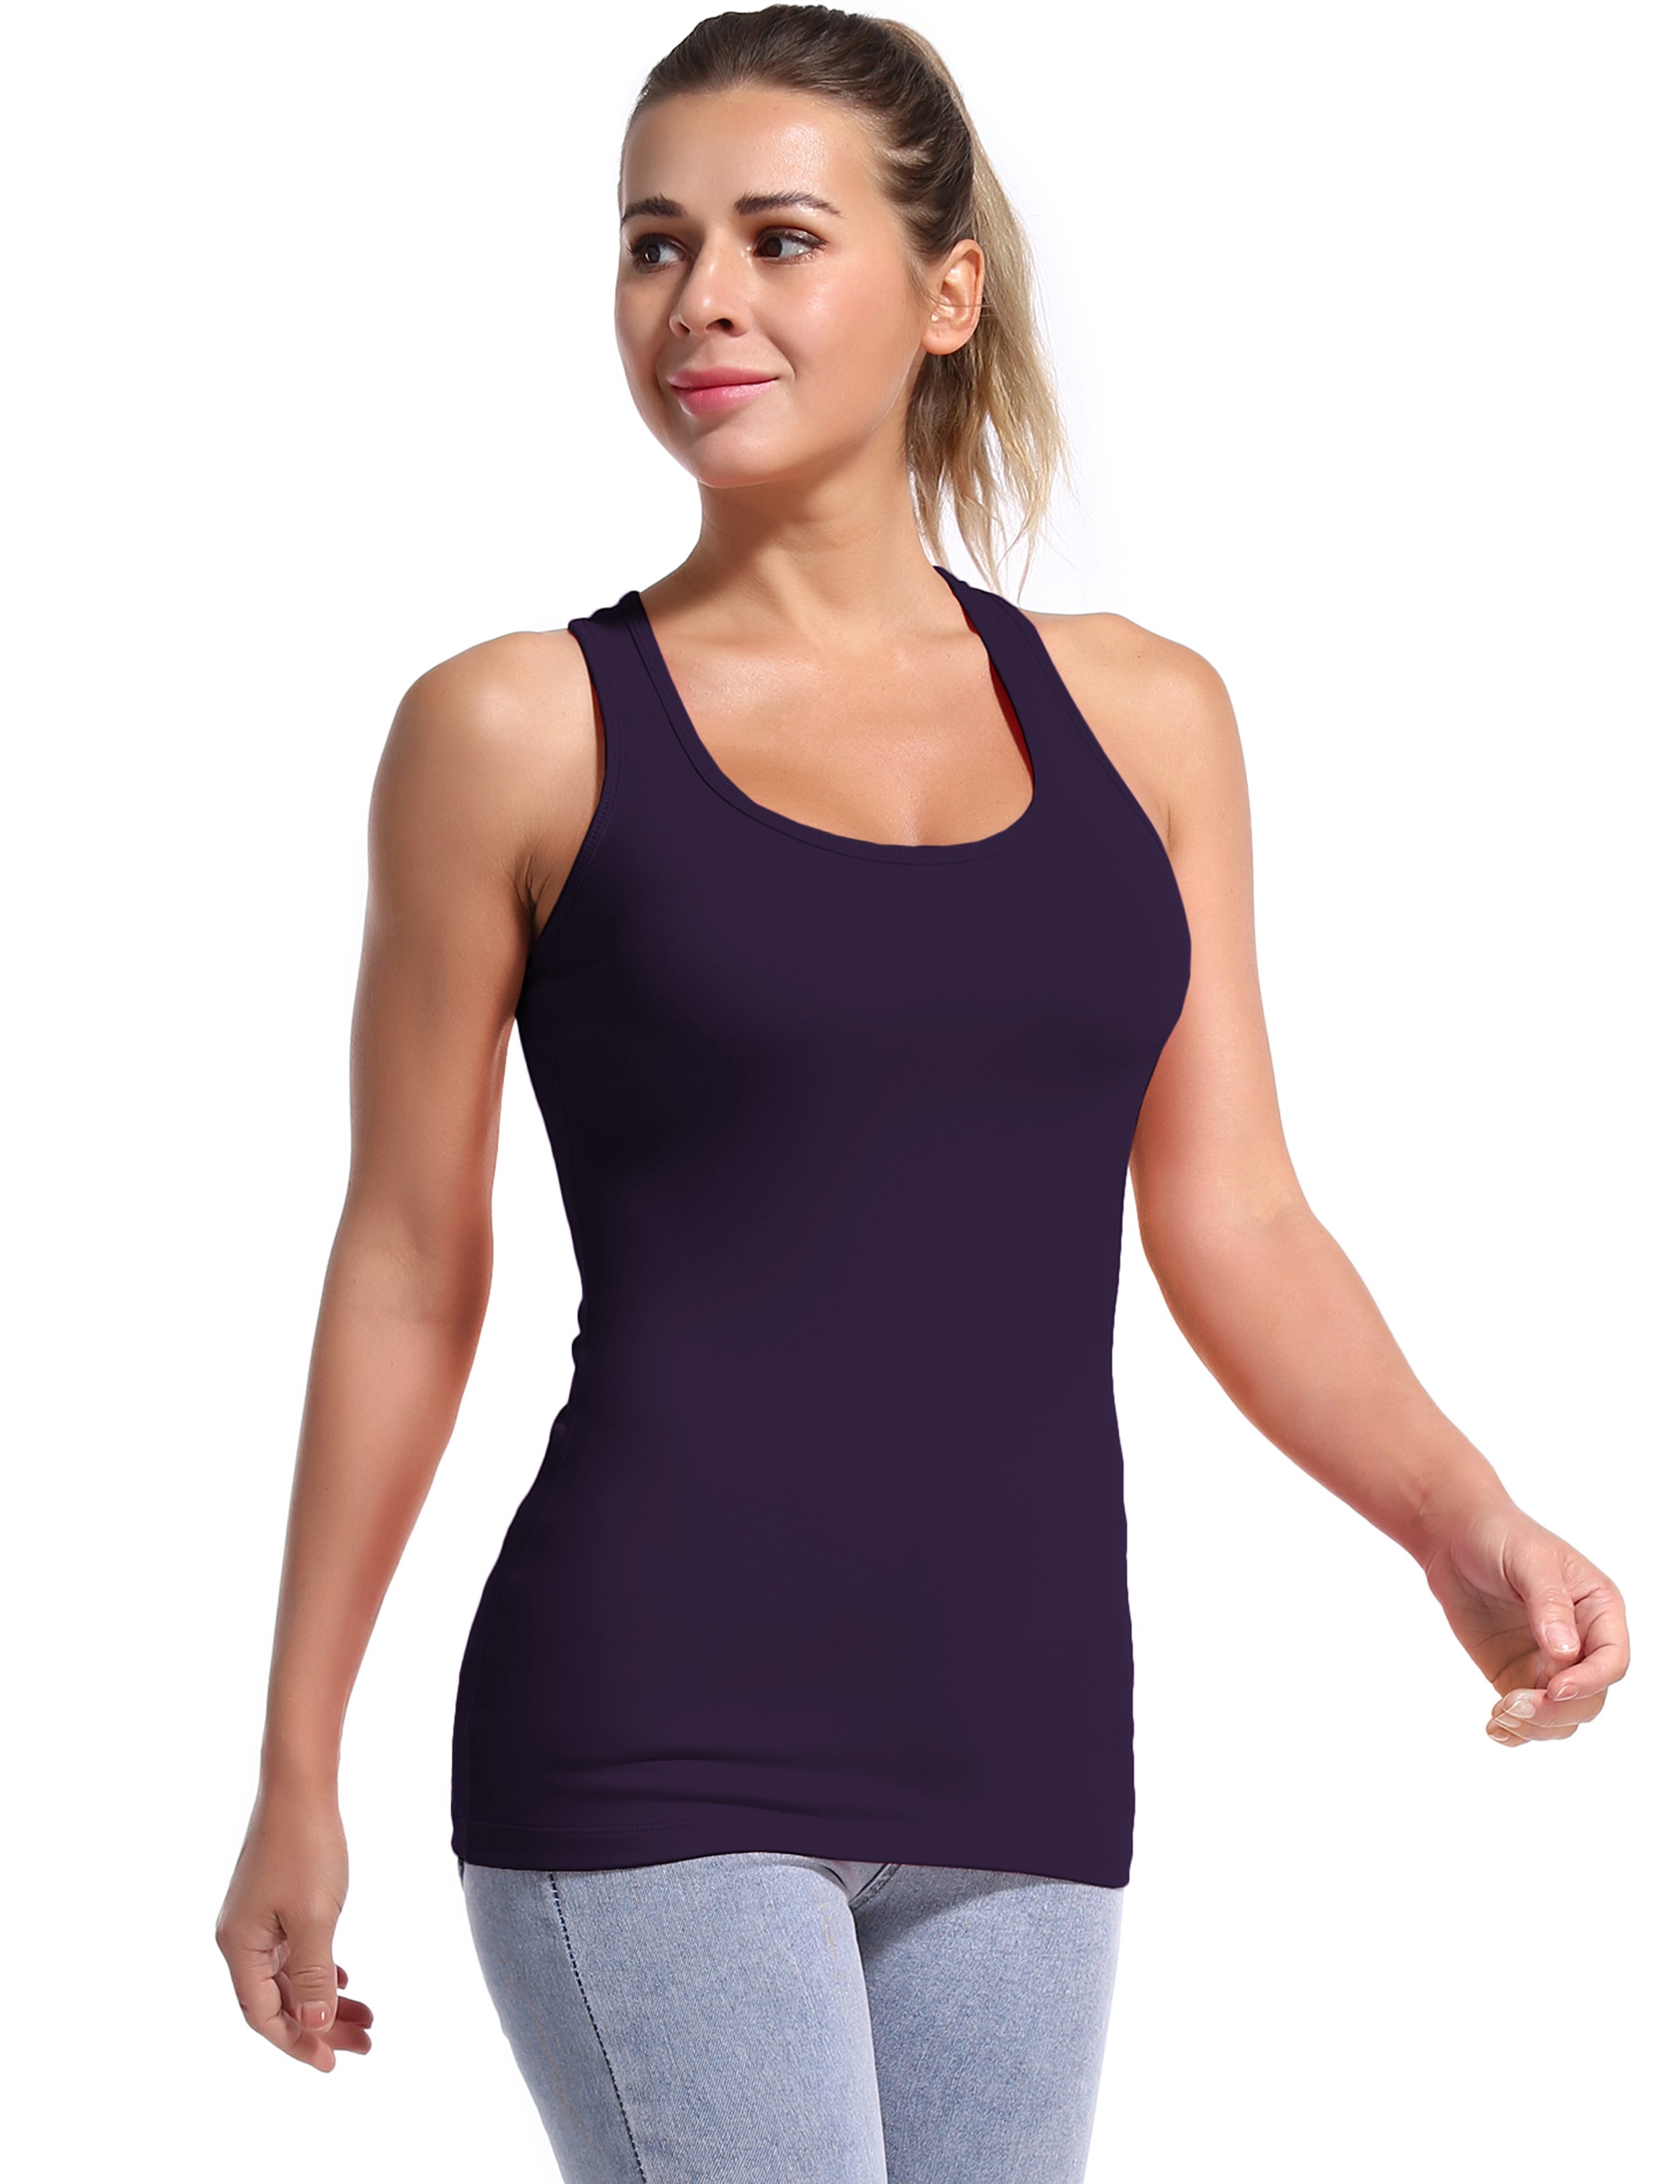 Racerback Athletic Tank Tops midnightblue 92%Nylon/8%Spandex(Cotton Soft) Designed for Running Tight Fit So buttery soft, it feels weightless Sweat-wicking Four-way stretch Breathable Contours your body Sits below the waistband for moderate, everyday coverage